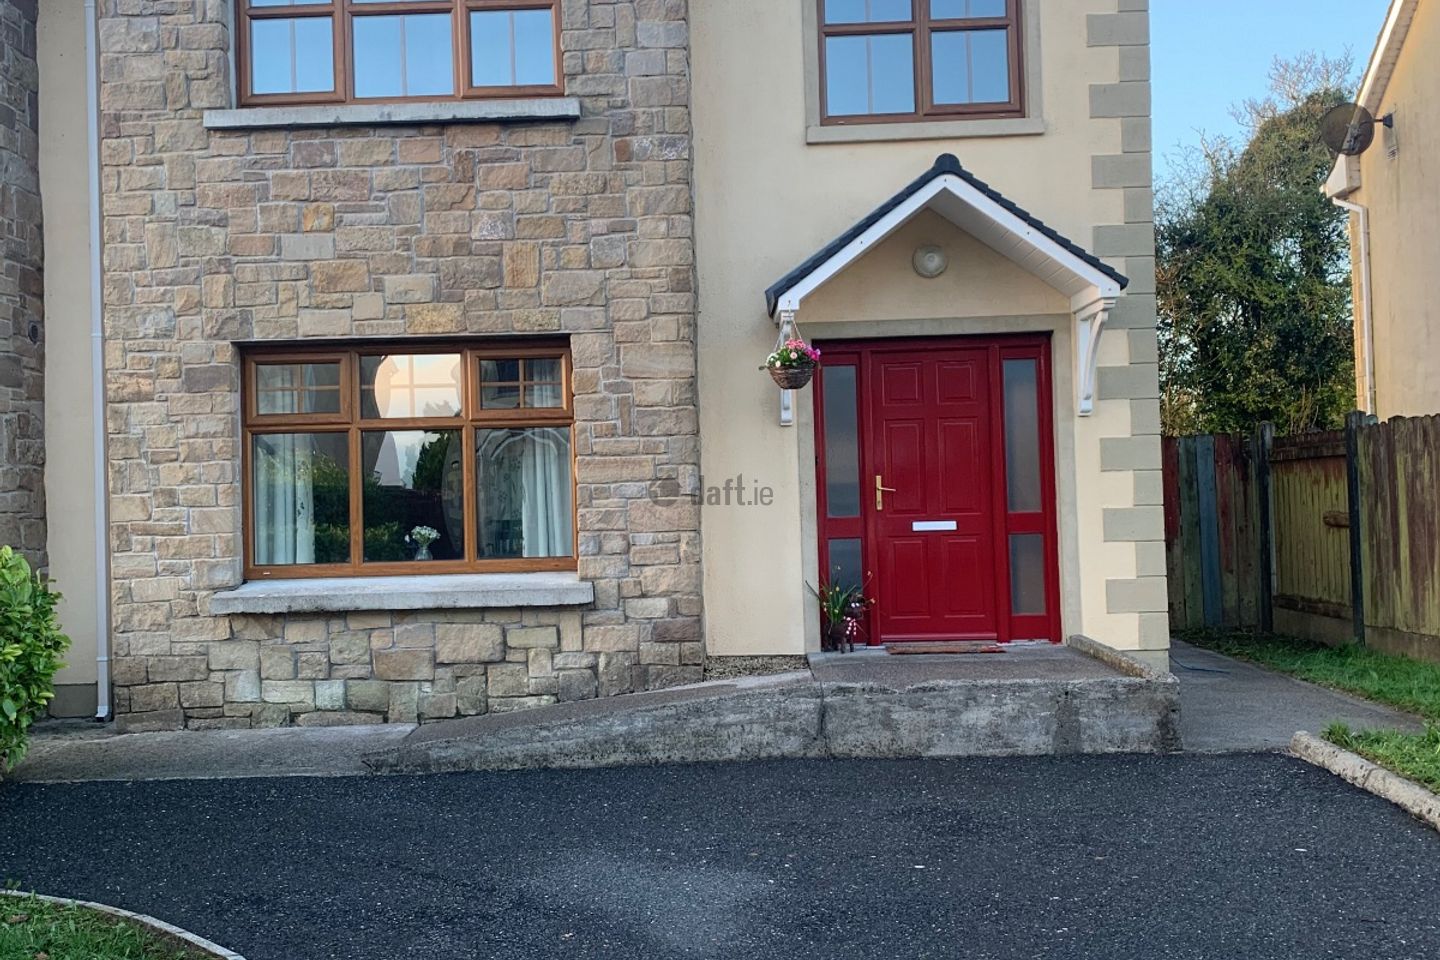 34 Watervale, Roosky, Carrick-on-shannon, Rooskey, Co. Leitrim